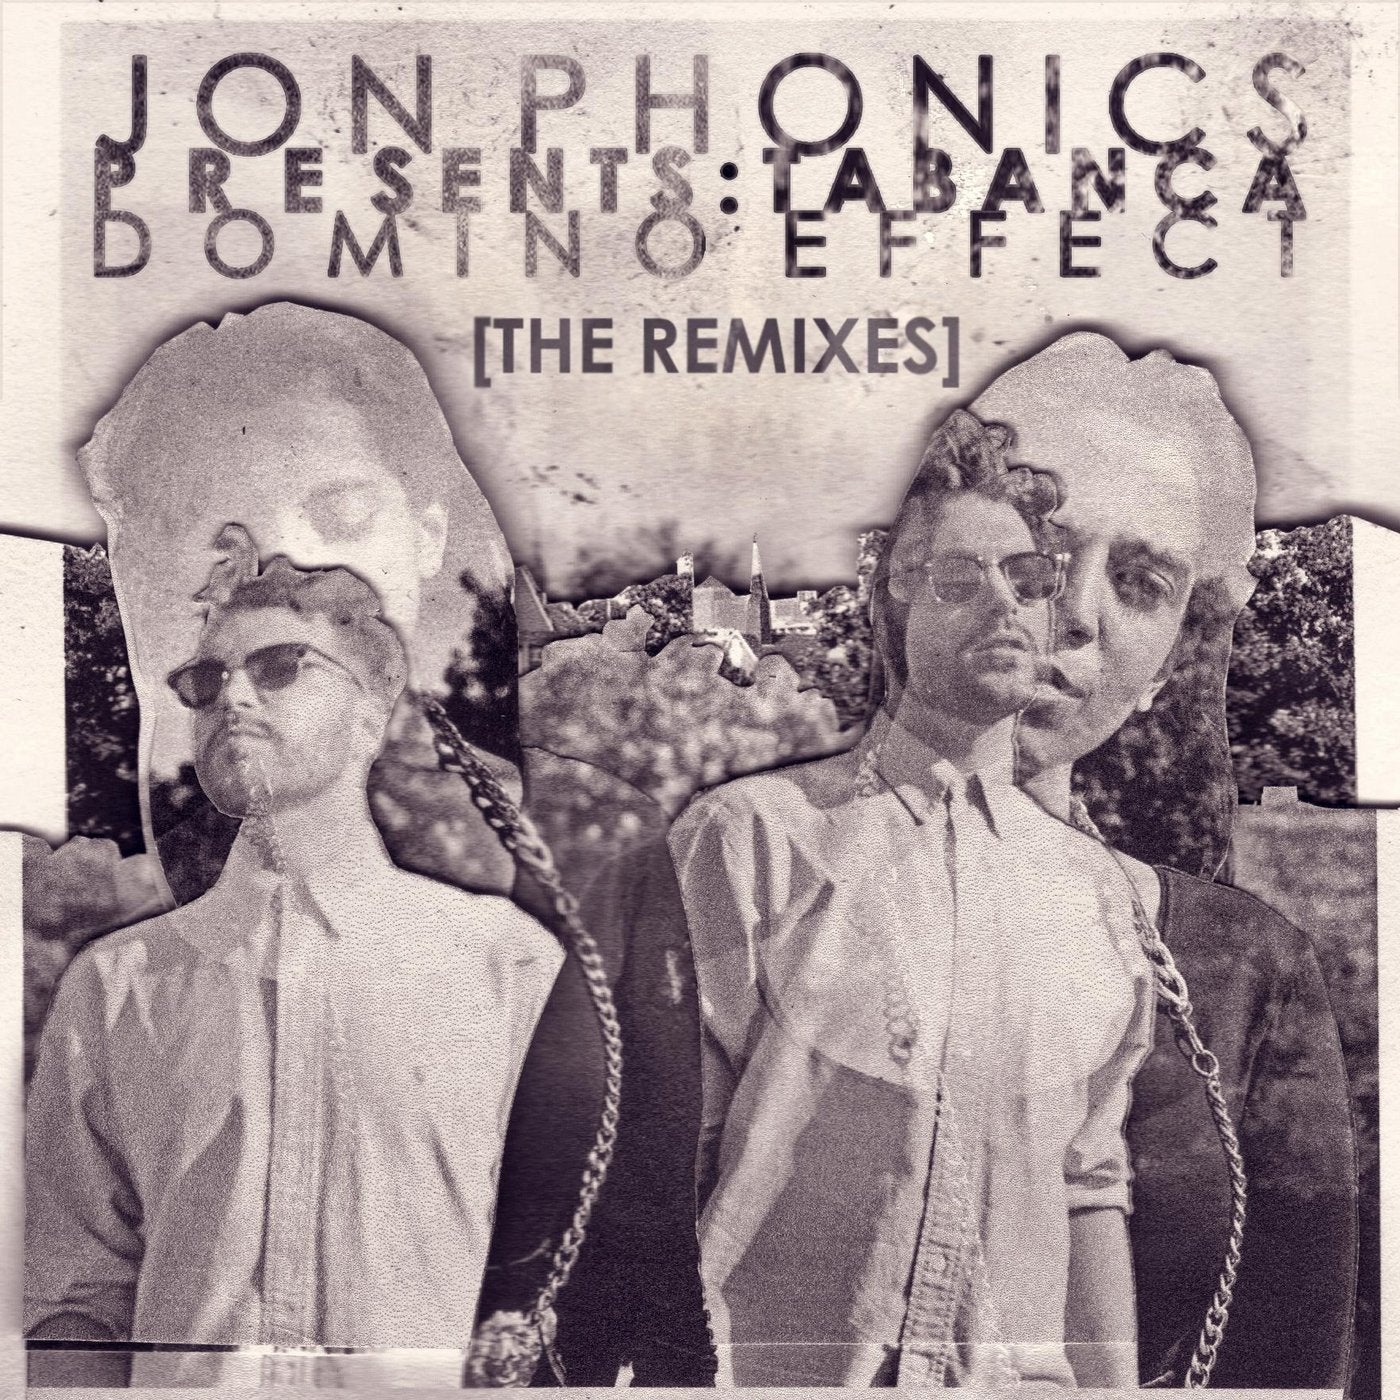 Domino Effect (The Remixes) feat. Tabanca